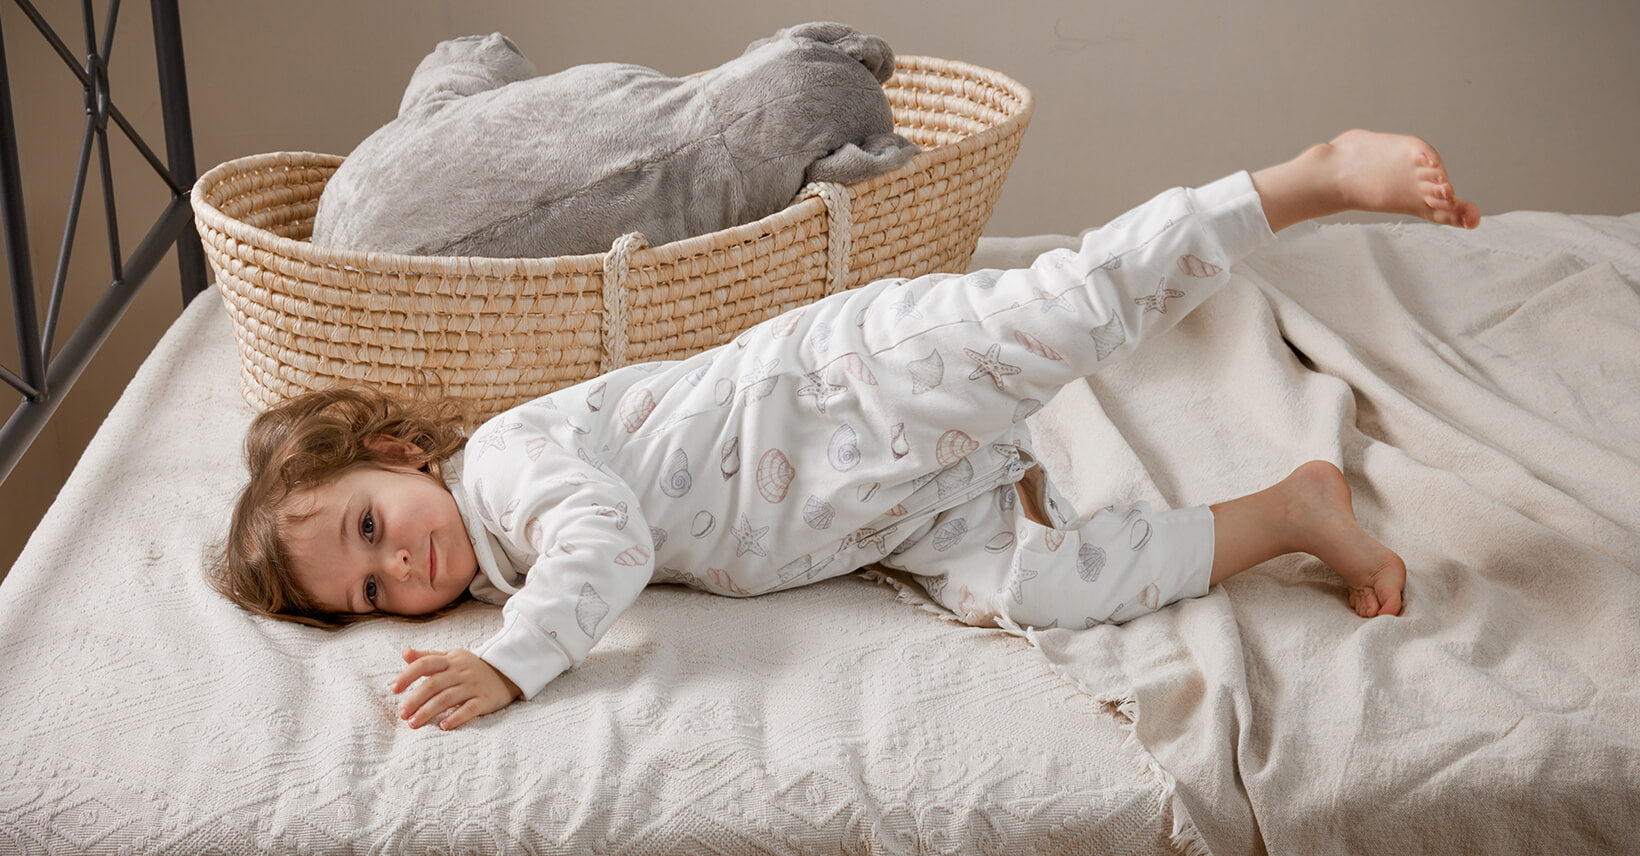 What Is The Best Sleeping Temperature for Baby Slumber?